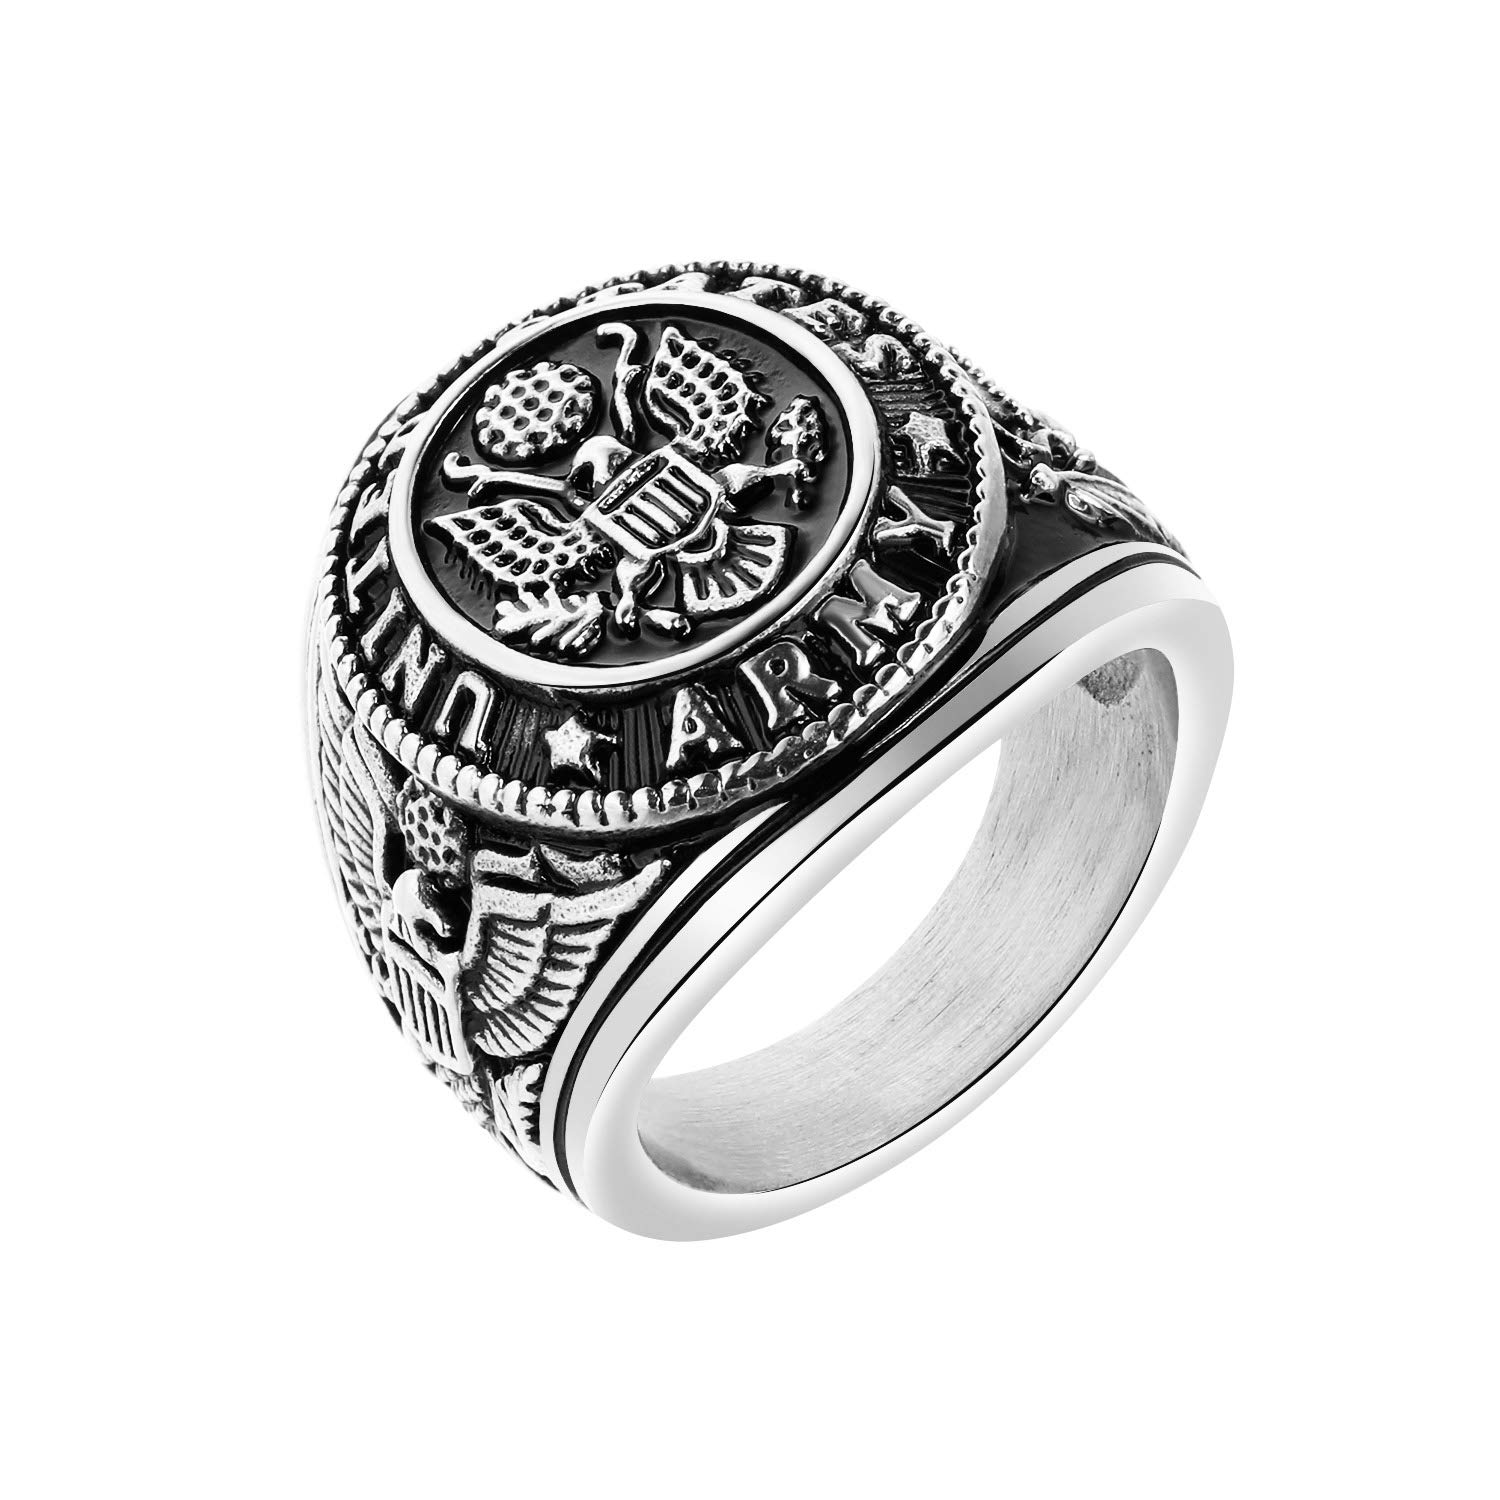 U.S.AIR FORCE military ring college ring JOSTENS company manufactured :  Real Yahoo auction salling